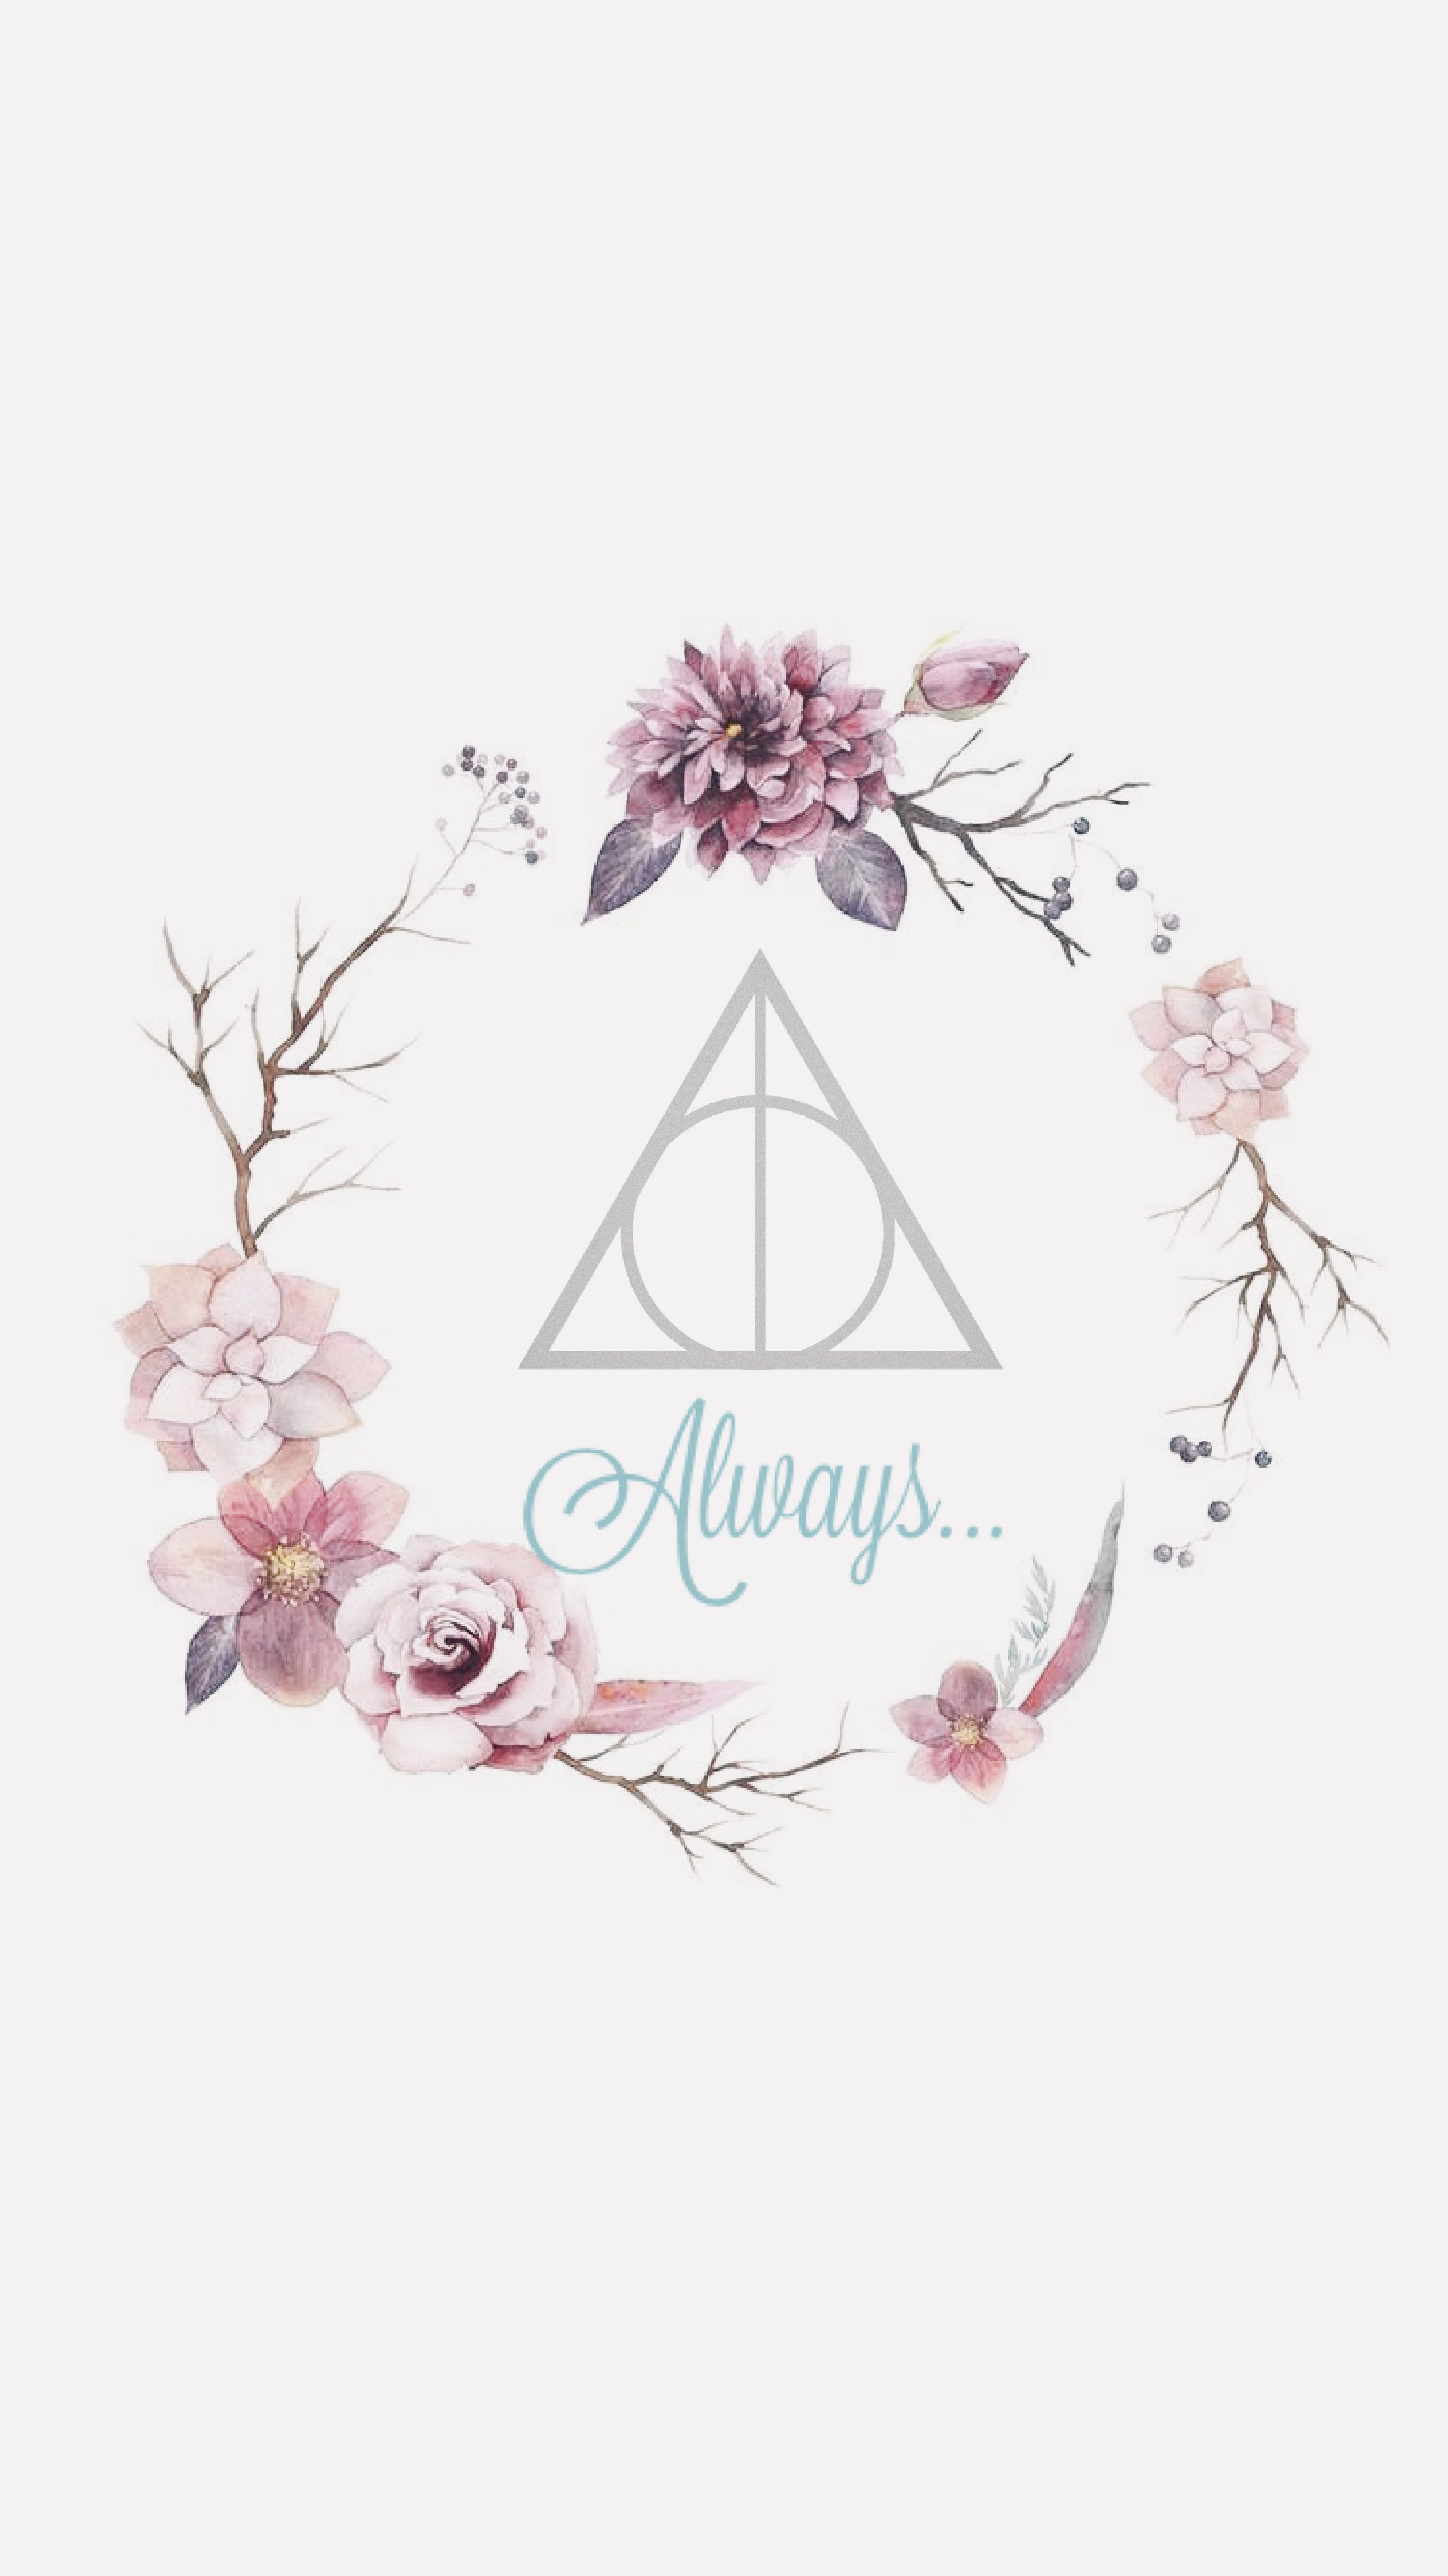 Wallpaper Harry Potter Always Pink girly cute flowers dealthy hallows. Harry potter background, Harry potter wallpaper phone, Harry potter wallpaper